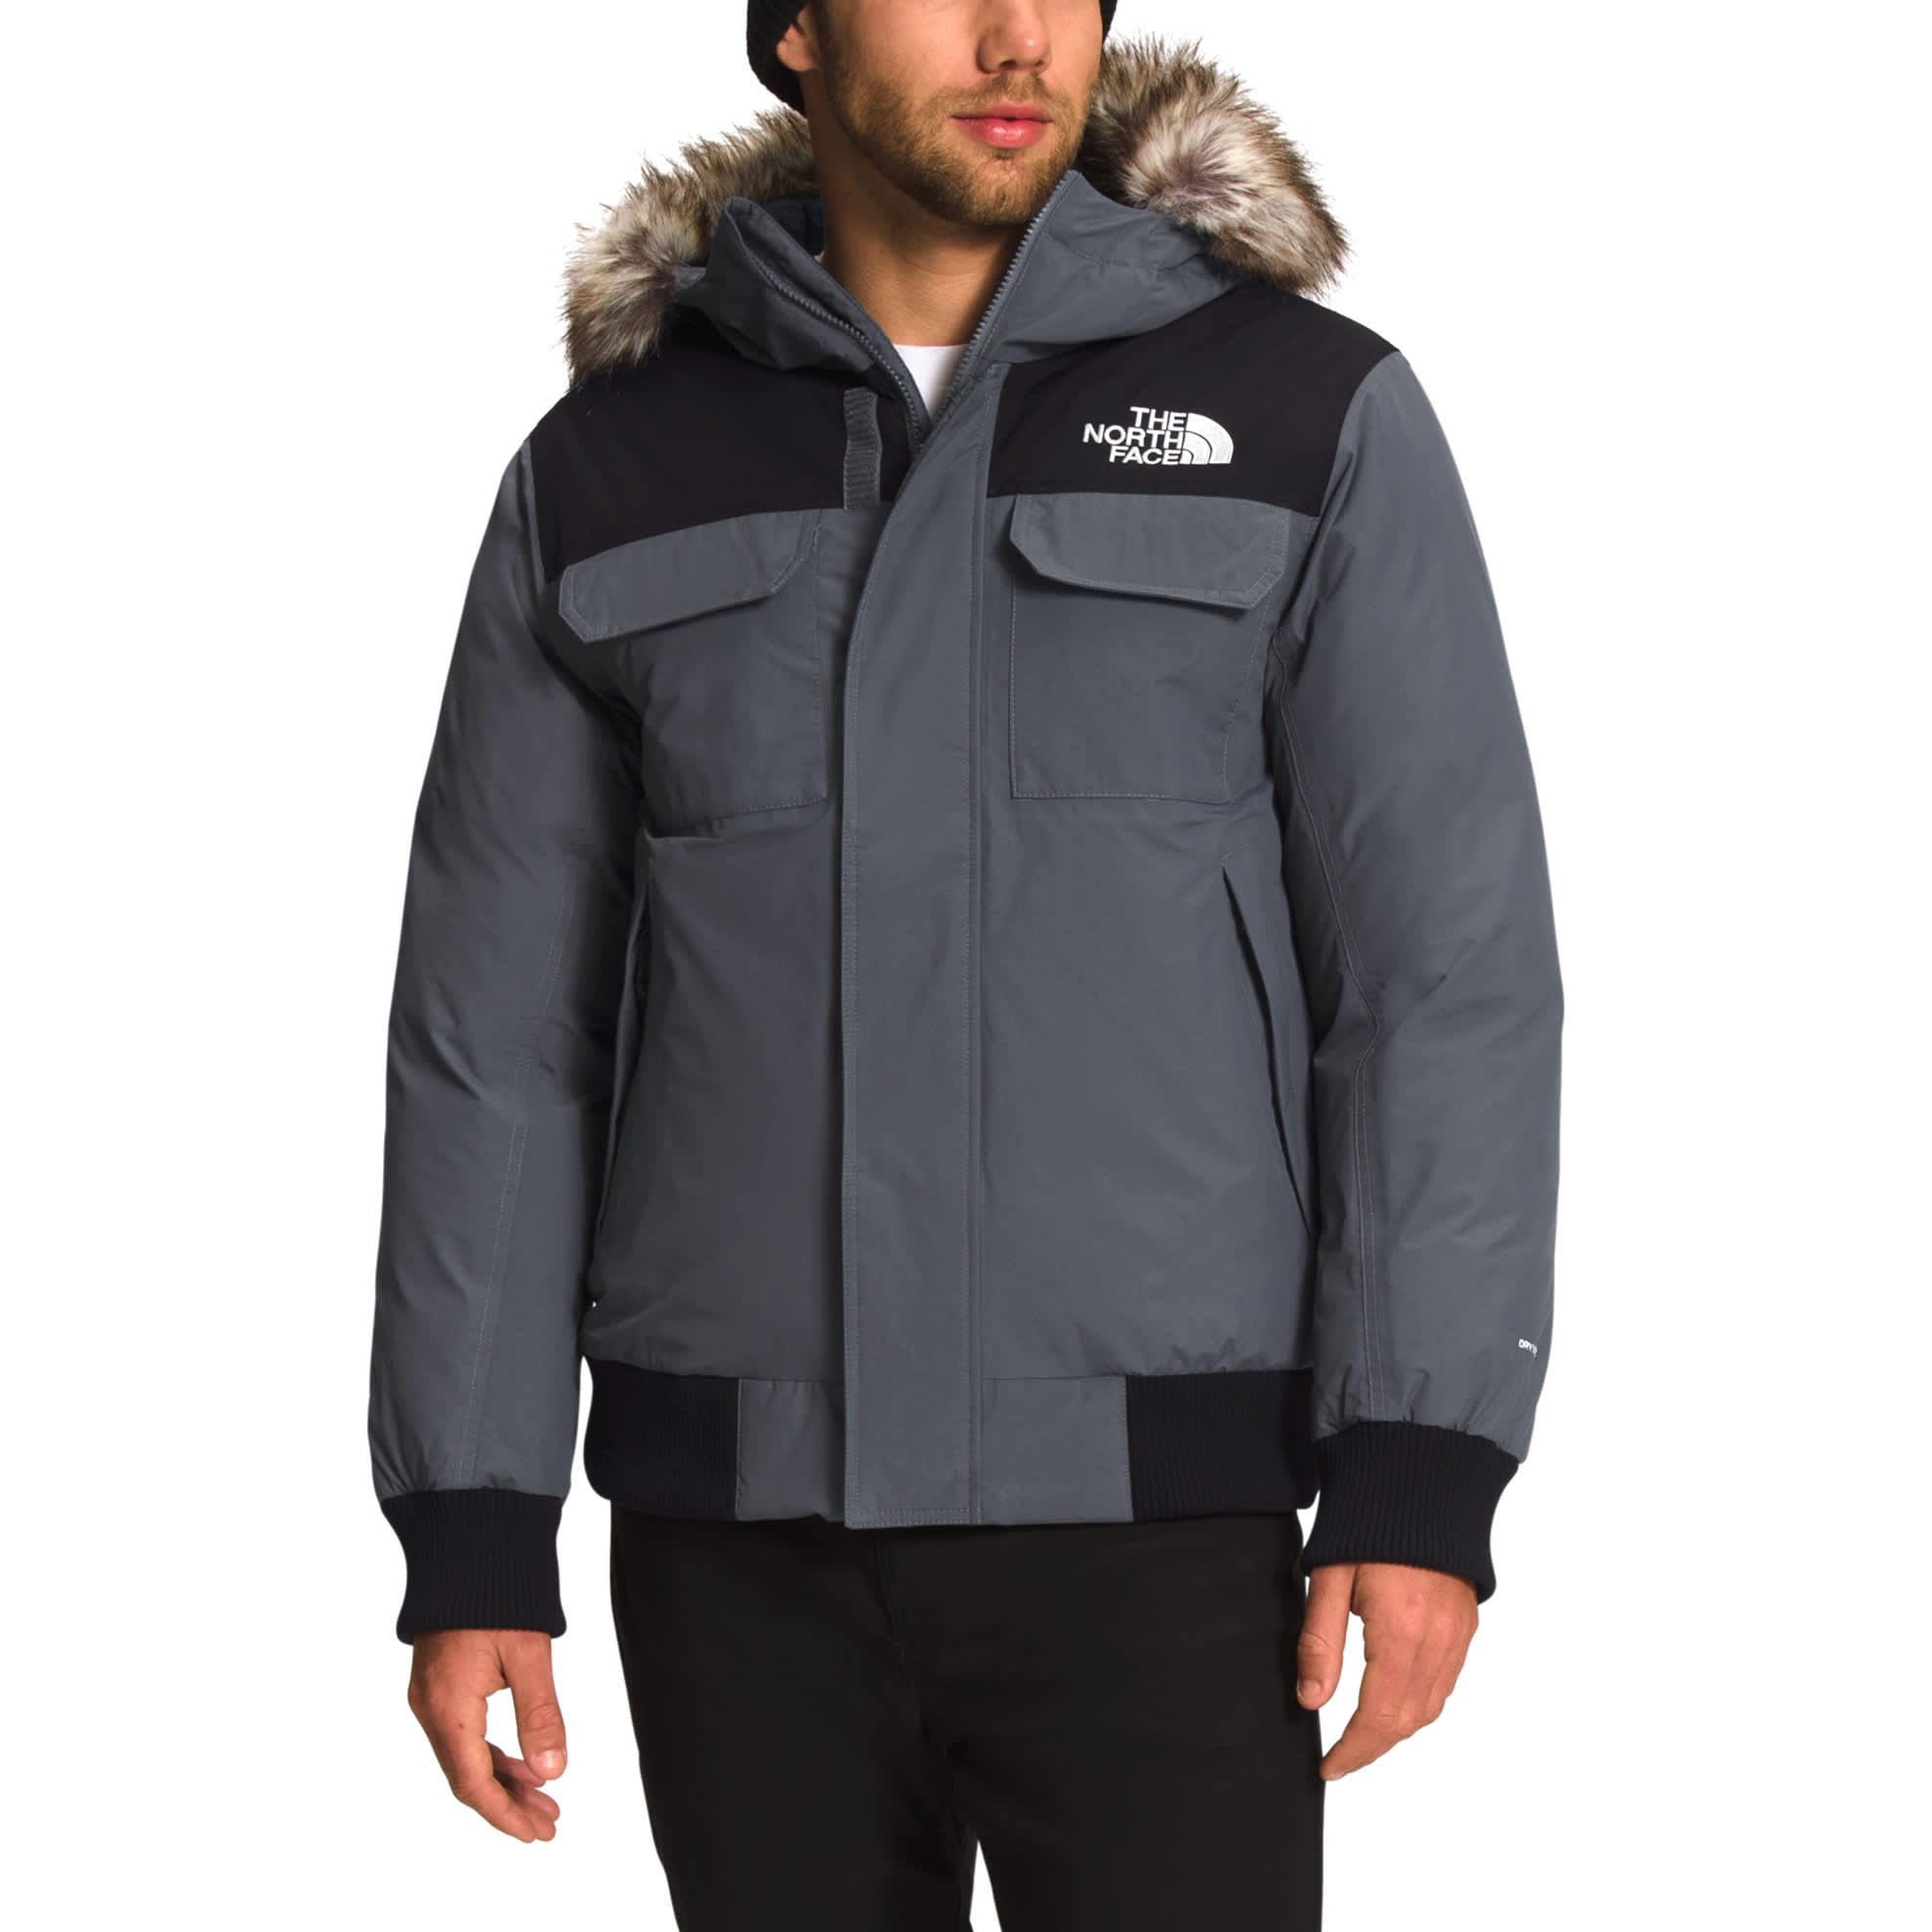 The North Face® Men’s McMurdo Bomber Jacket